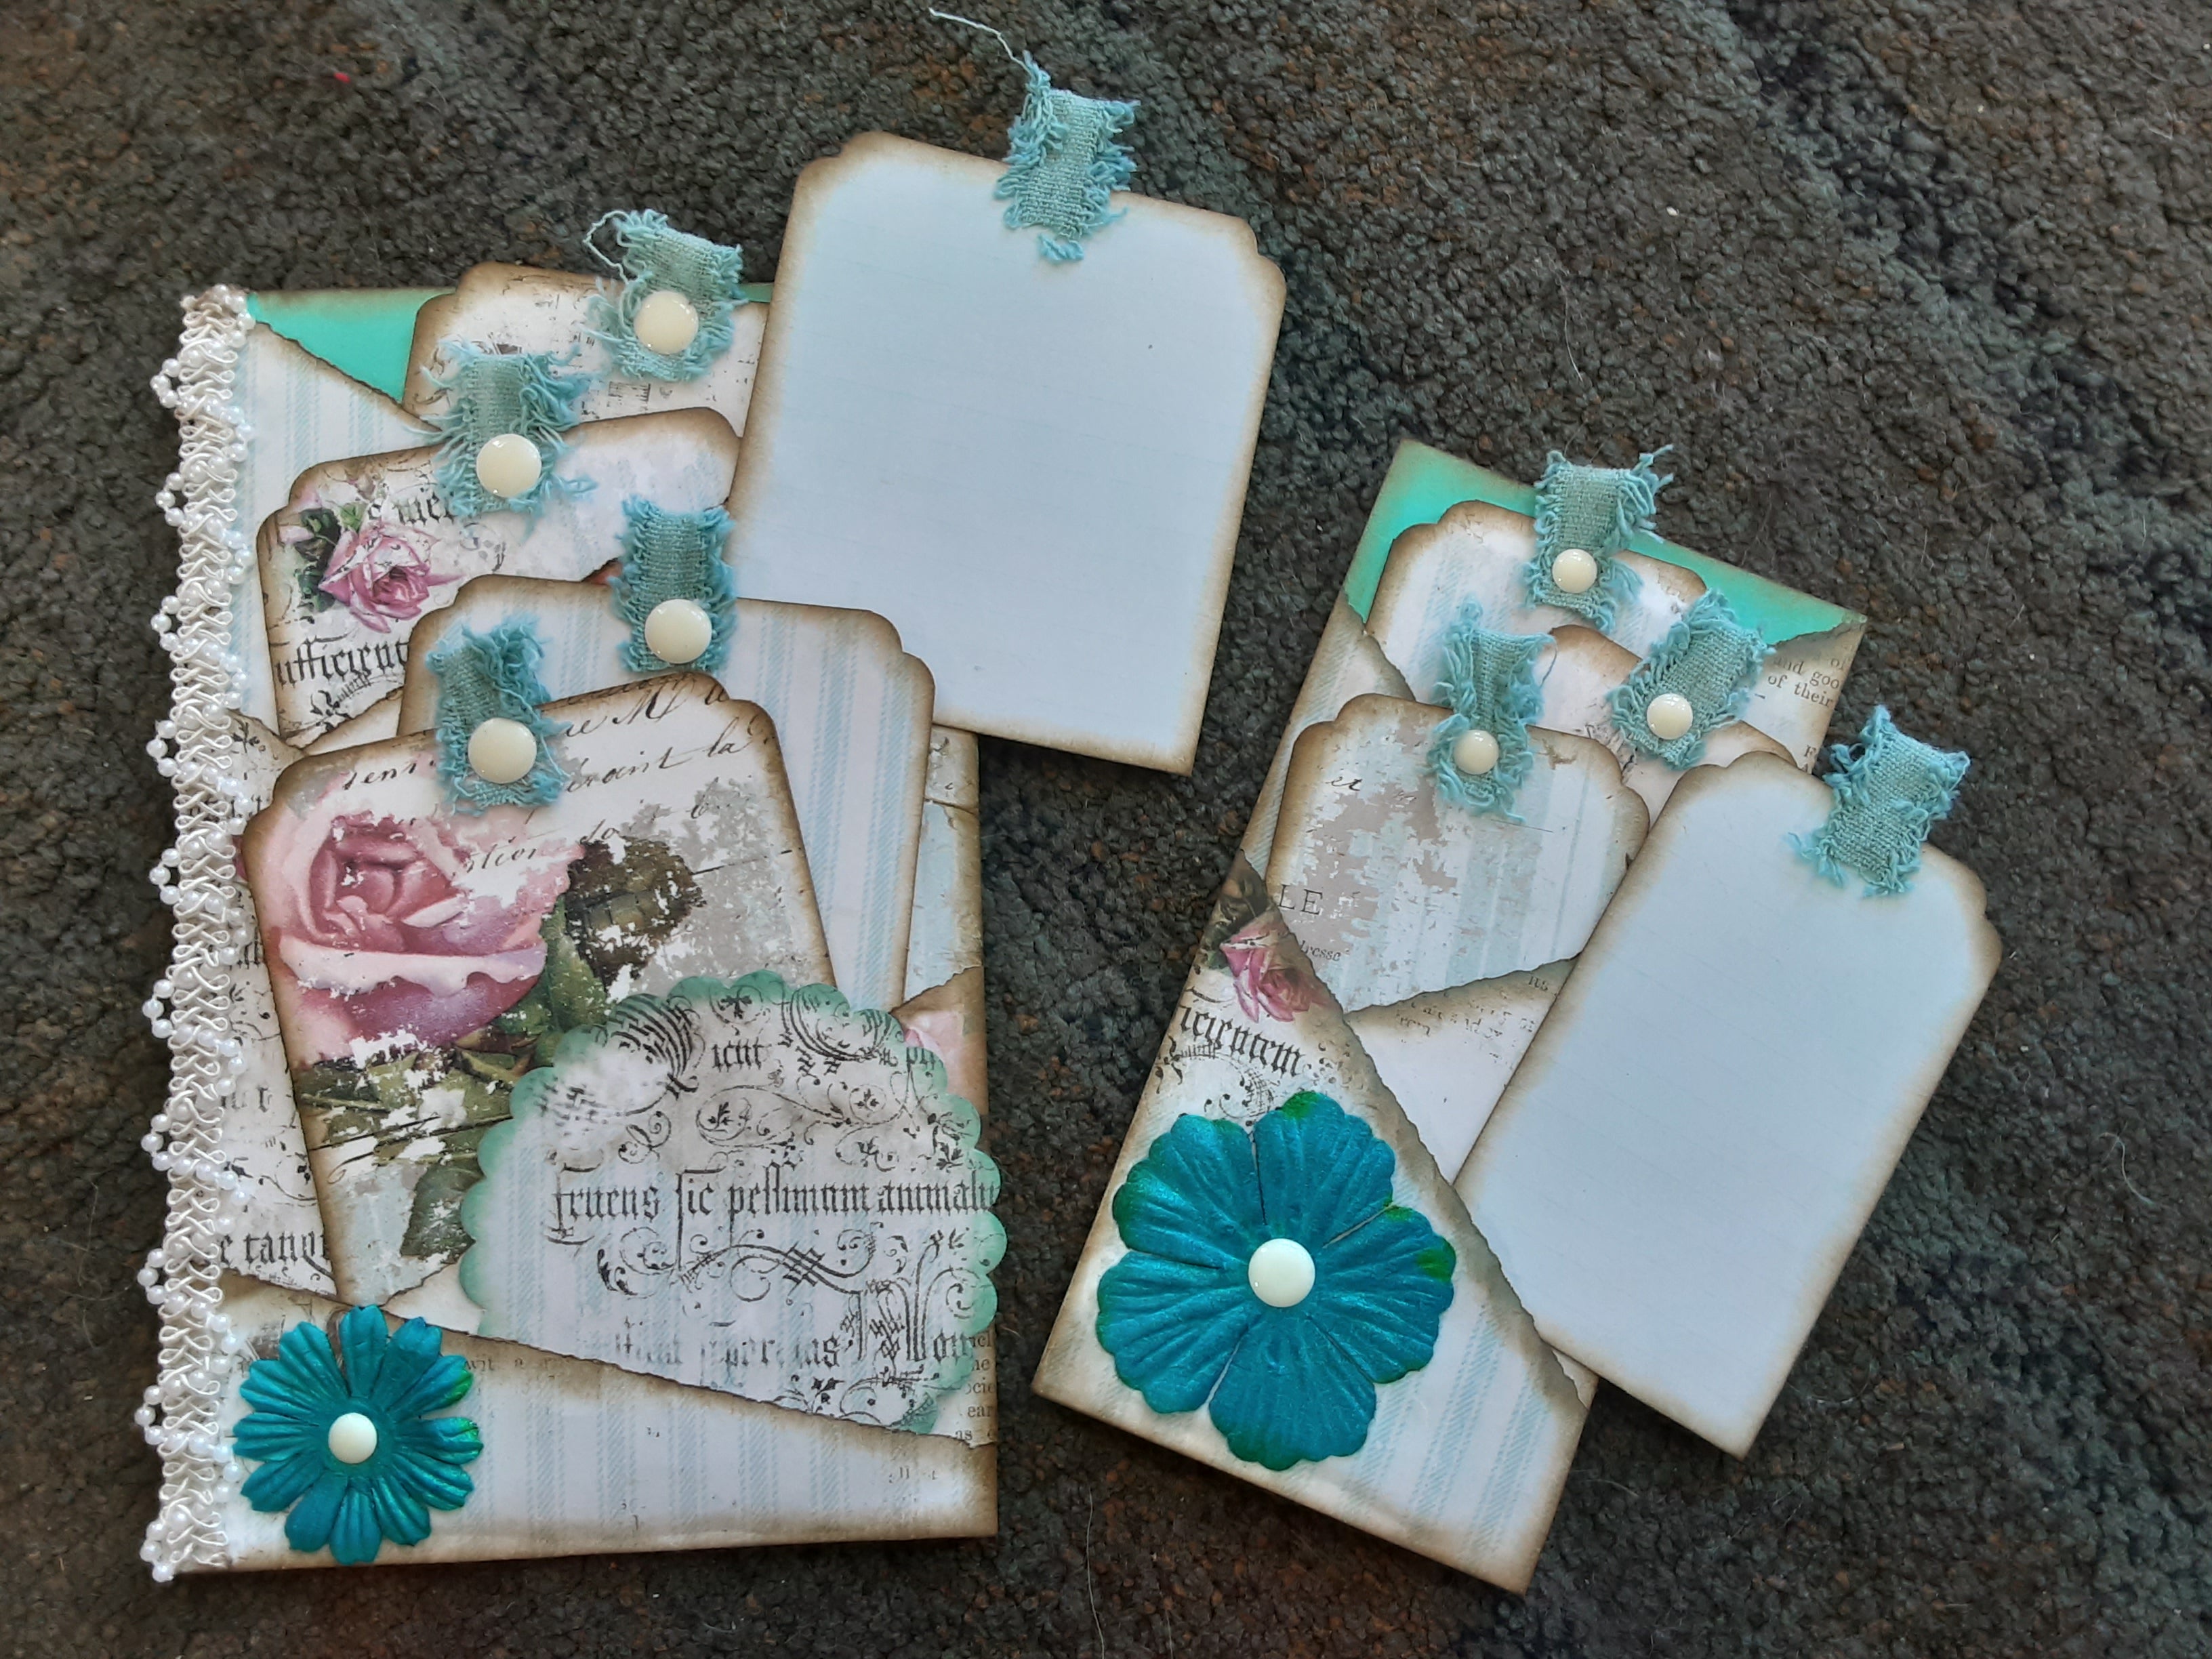 Junk Journal Book Page with Tags and Separate Tag--Teal